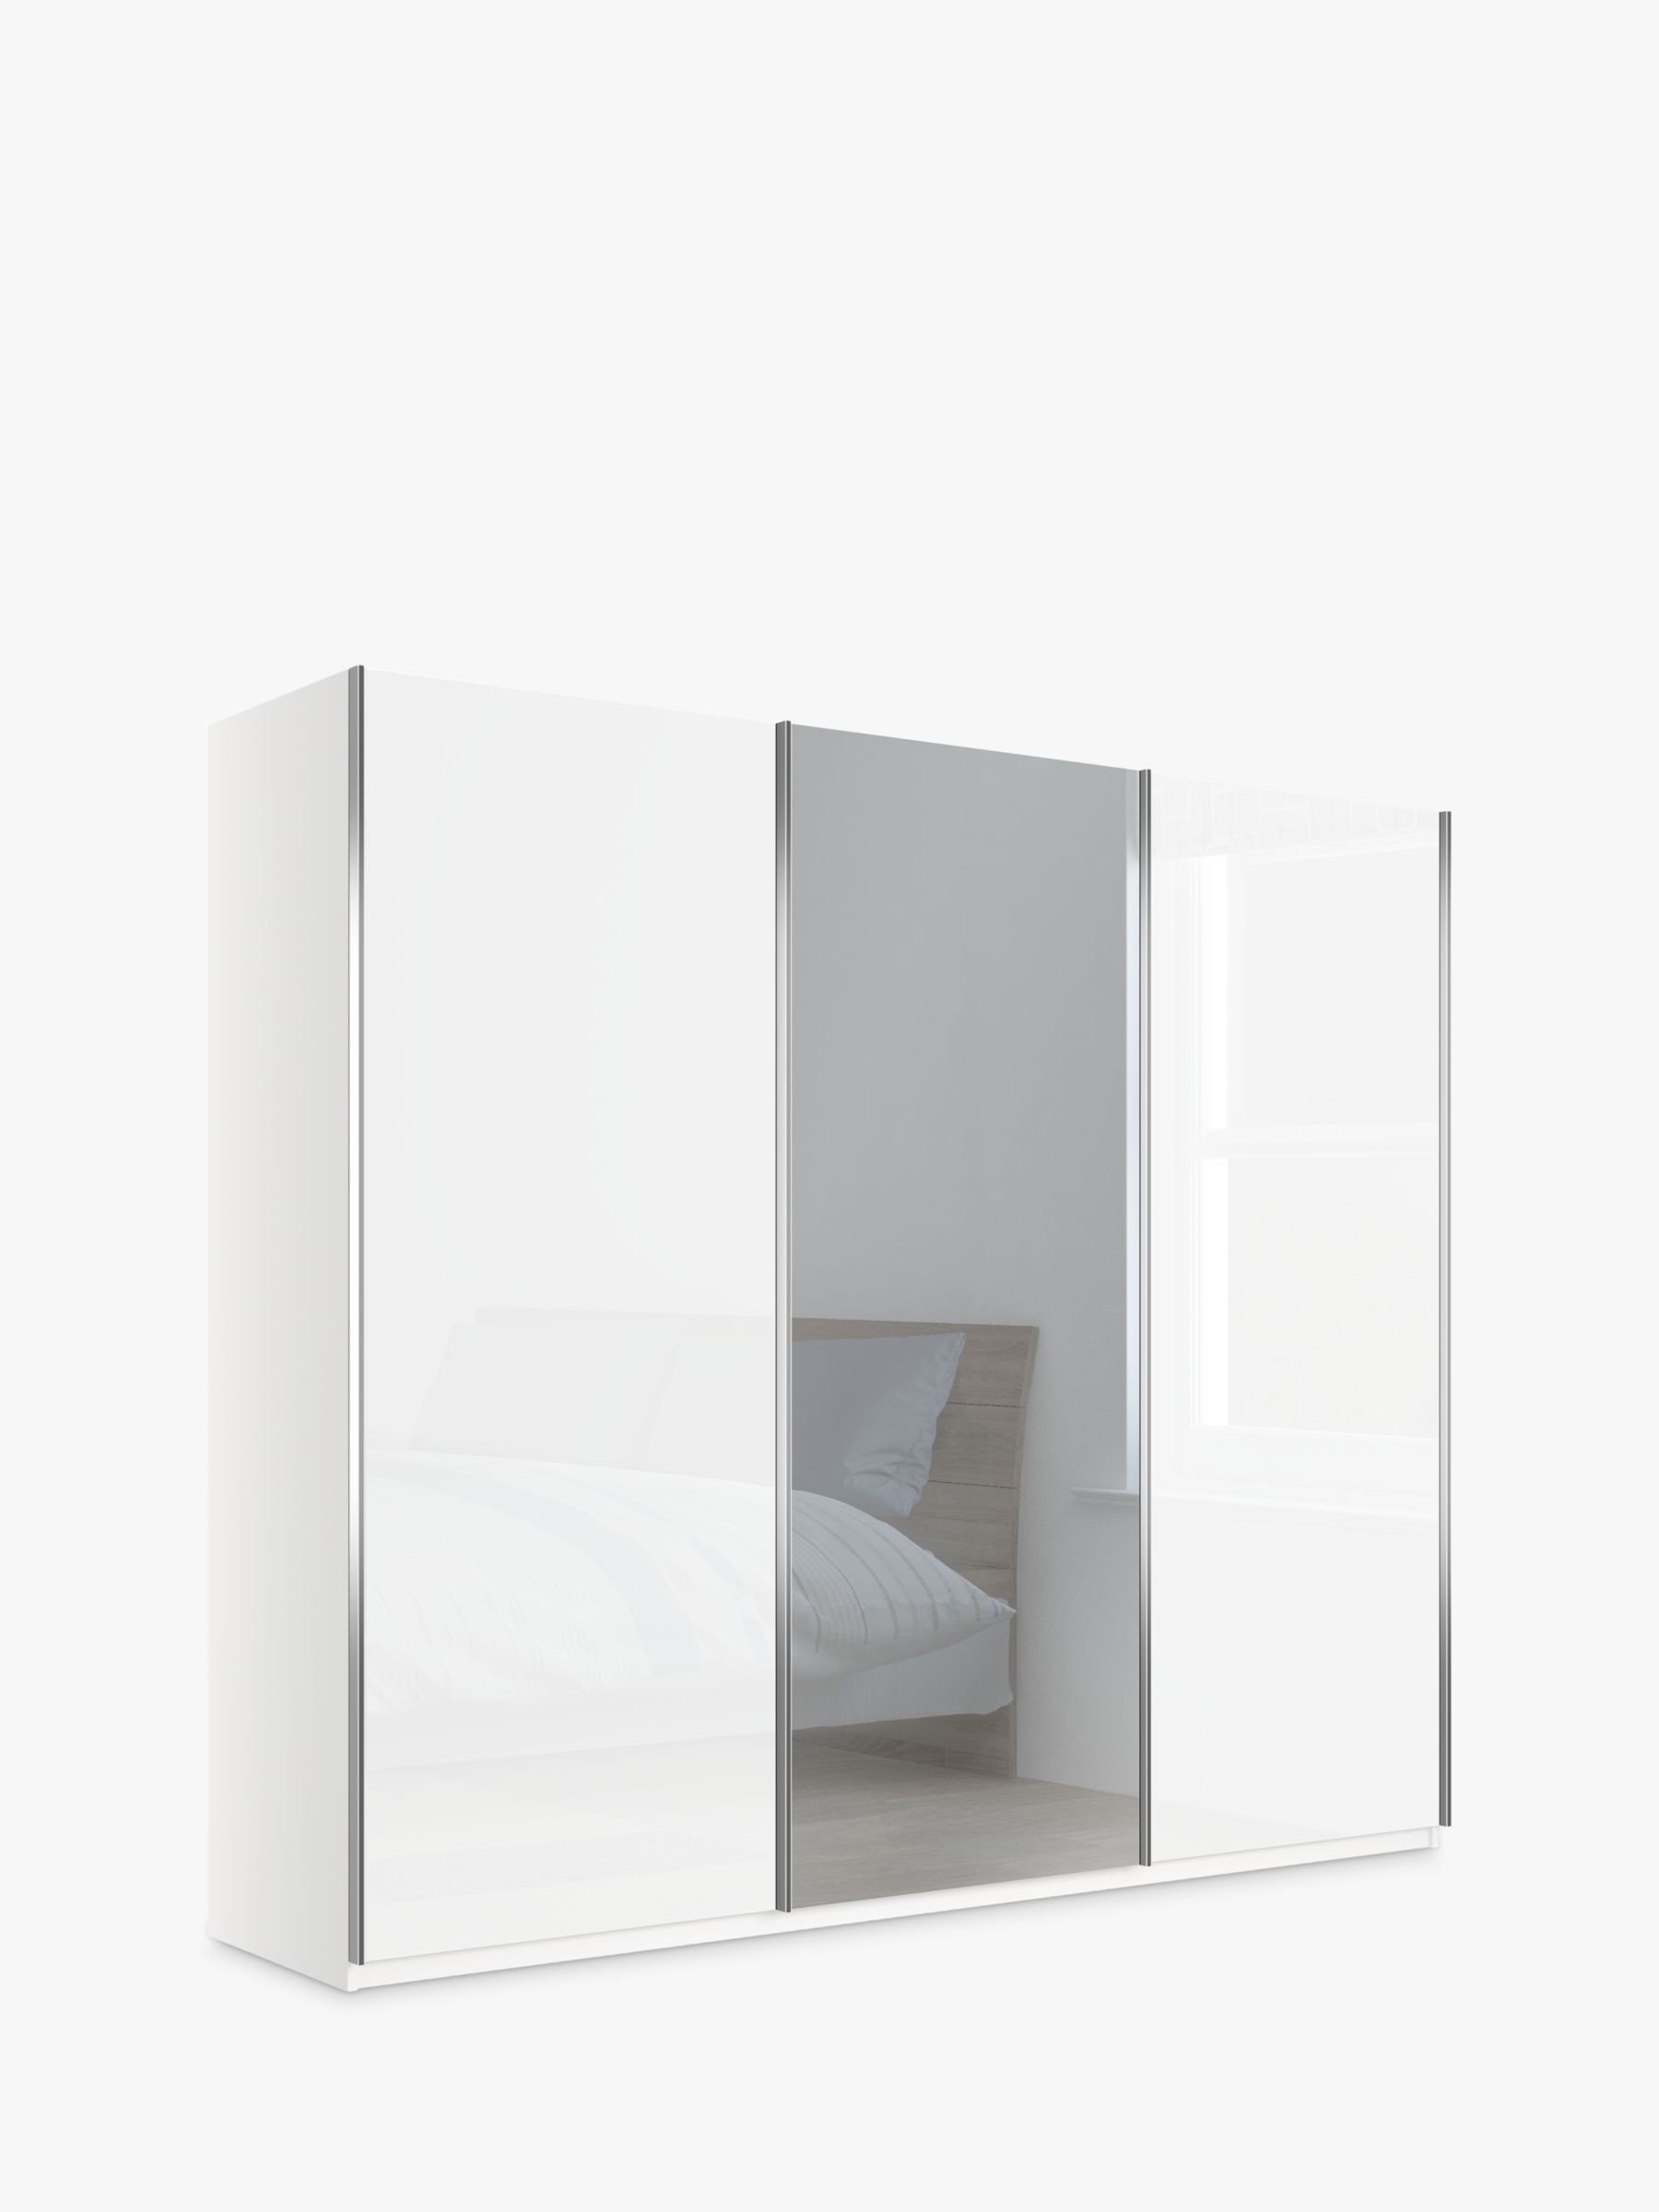 Photo of John lewis elstra 250cm wardrobe with glass and mirrored sliding doors